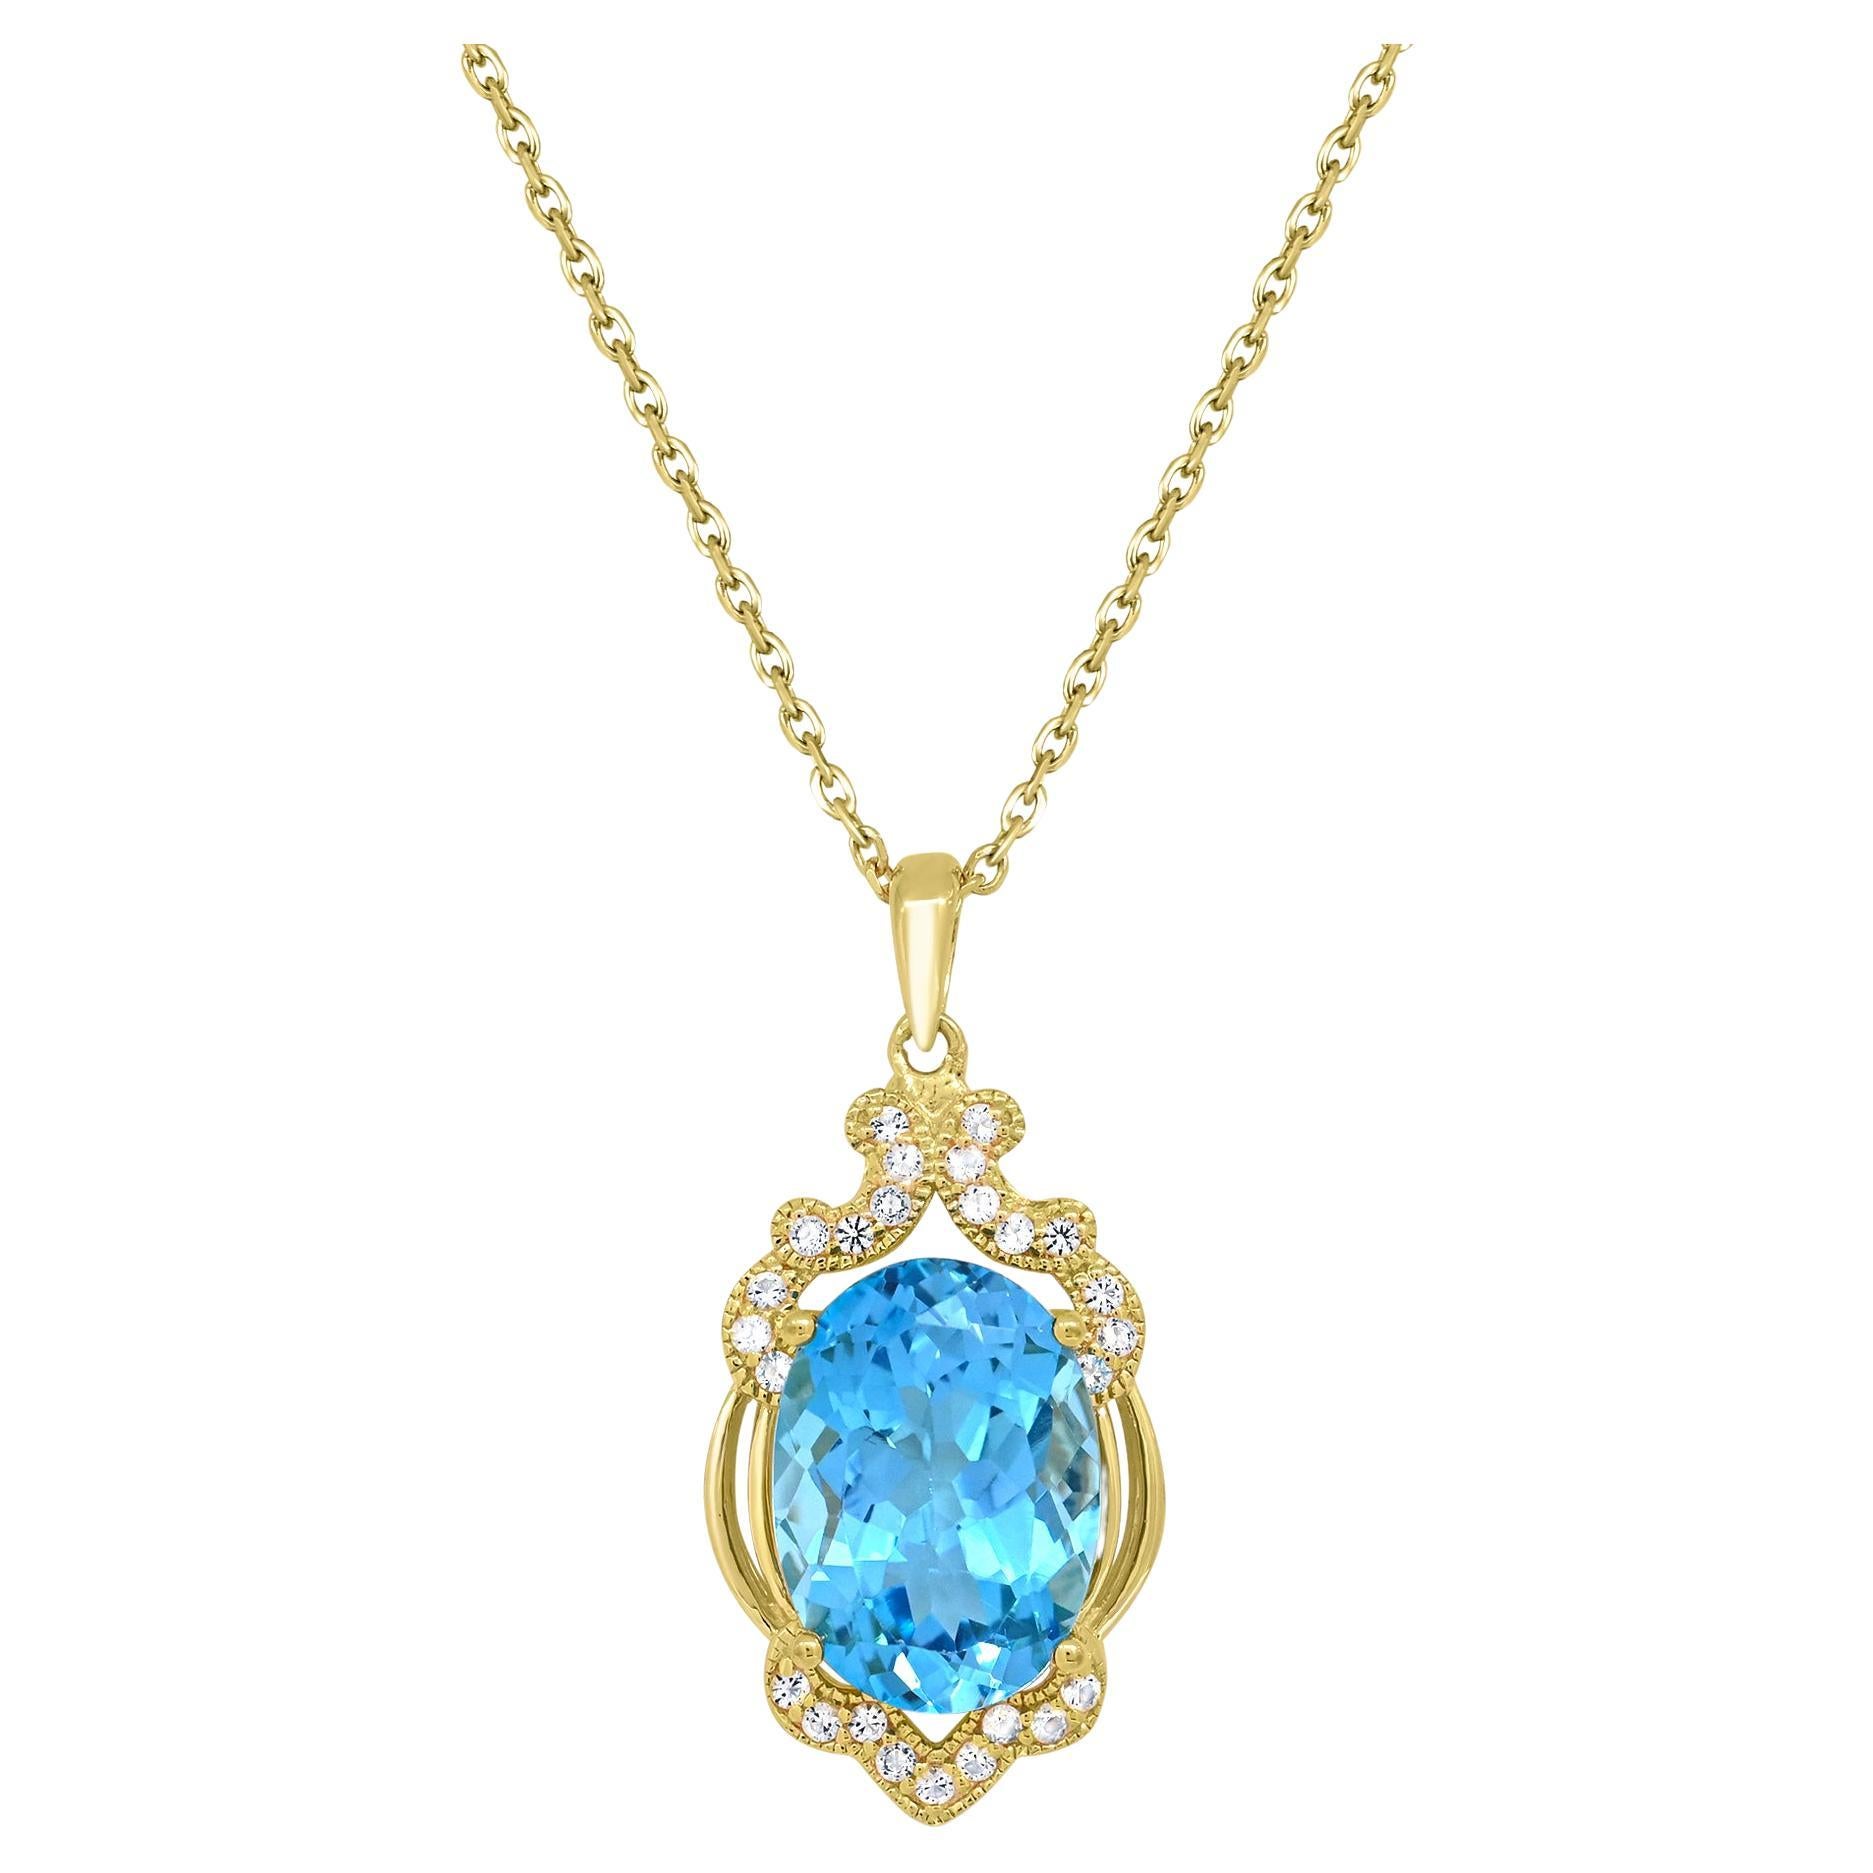 8-1/8 Carat White & Blue Topaz Necklace in 14K Yellow Gold over Sterling Silver For Sale